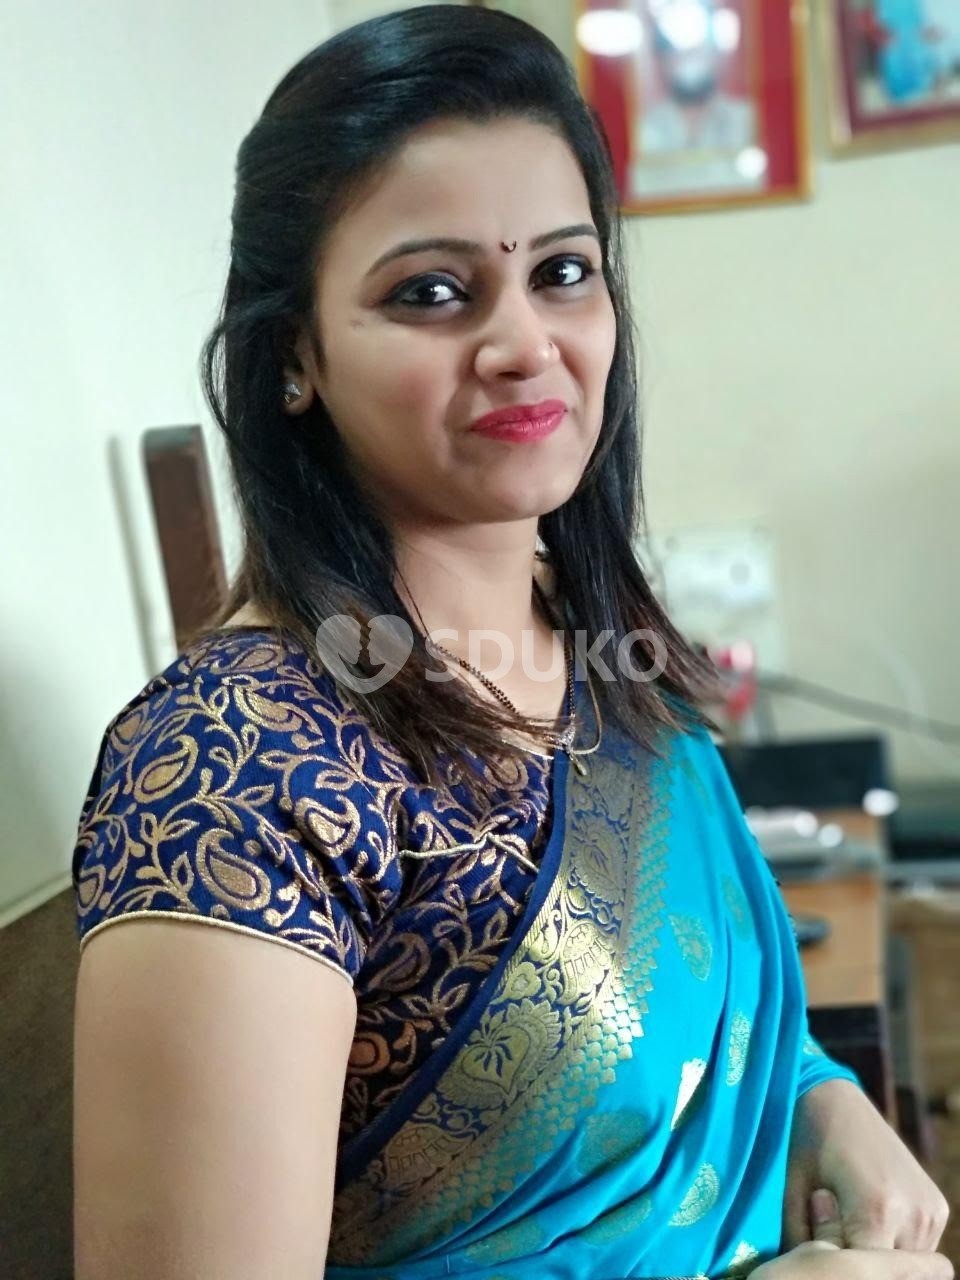 Kr Puram.....low price 🥰100% SAFE AND SECURE TODAY LOW PRICE UNLIMITED ENJOY HOT COLLEGE GIRL HOUSEWIFE AUNTIES AVAIL